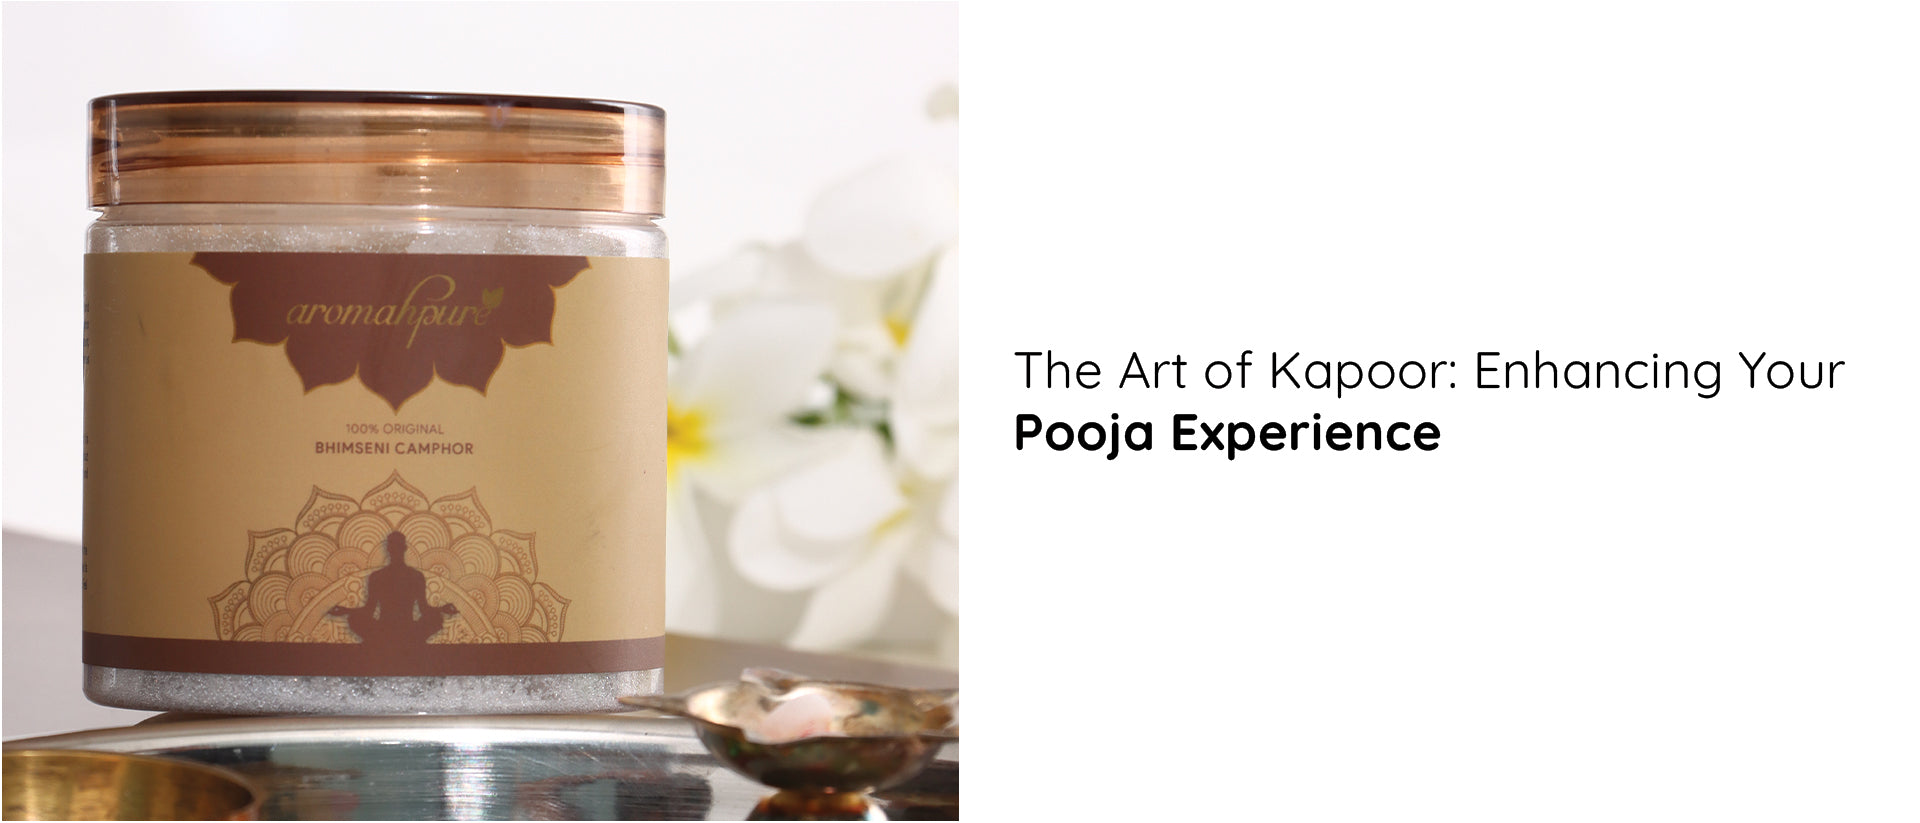 The Art of Kapoor: Enhancing Your Pooja Experience